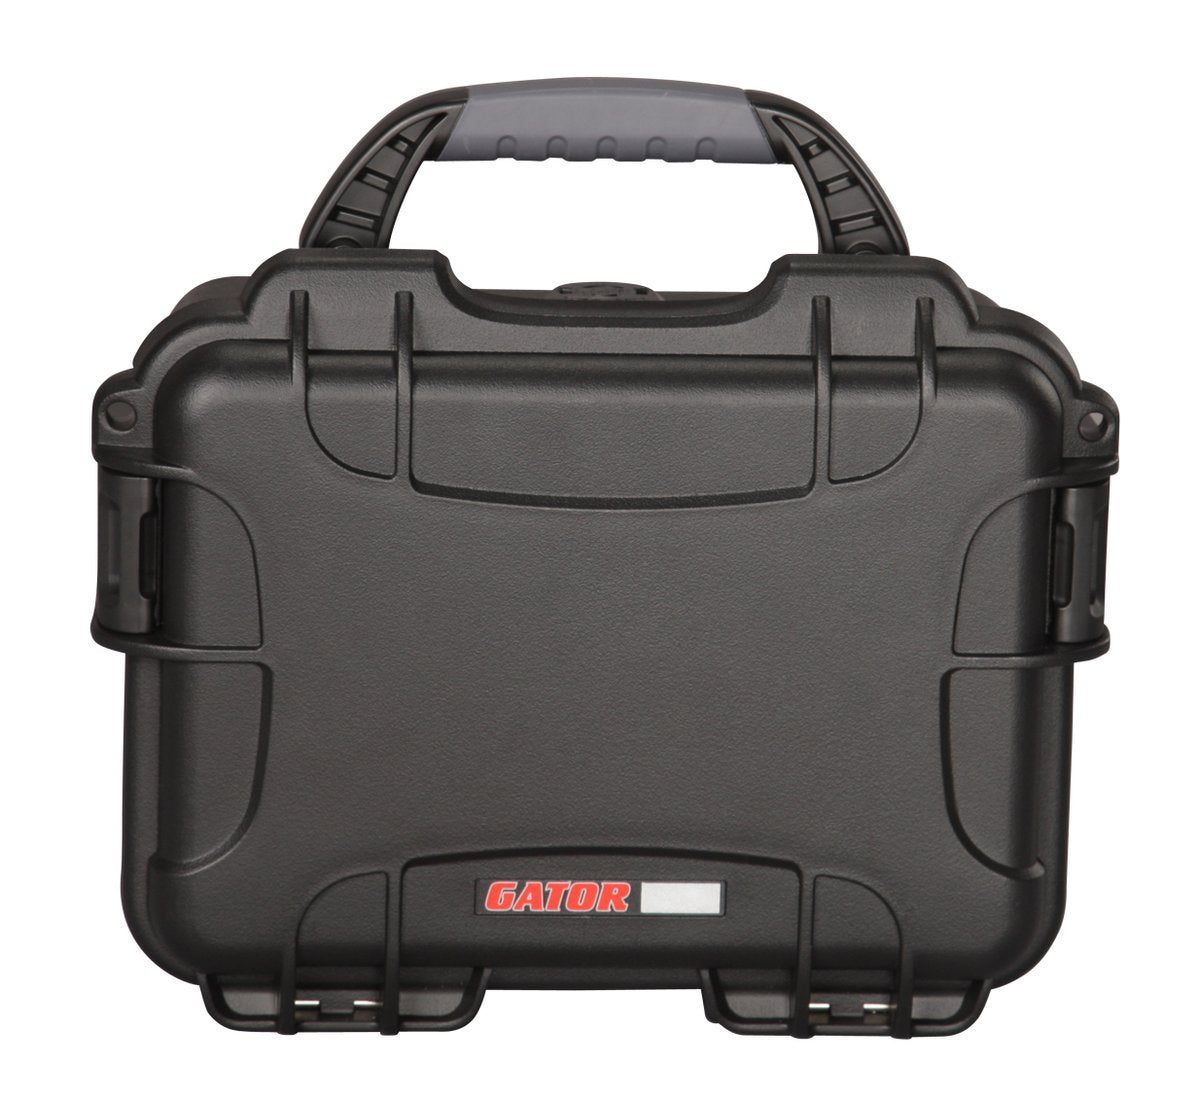 Black Waterproof Injection molded case, with interior dimensions of 8.4" x 6" x 3.7". DICED FOAM